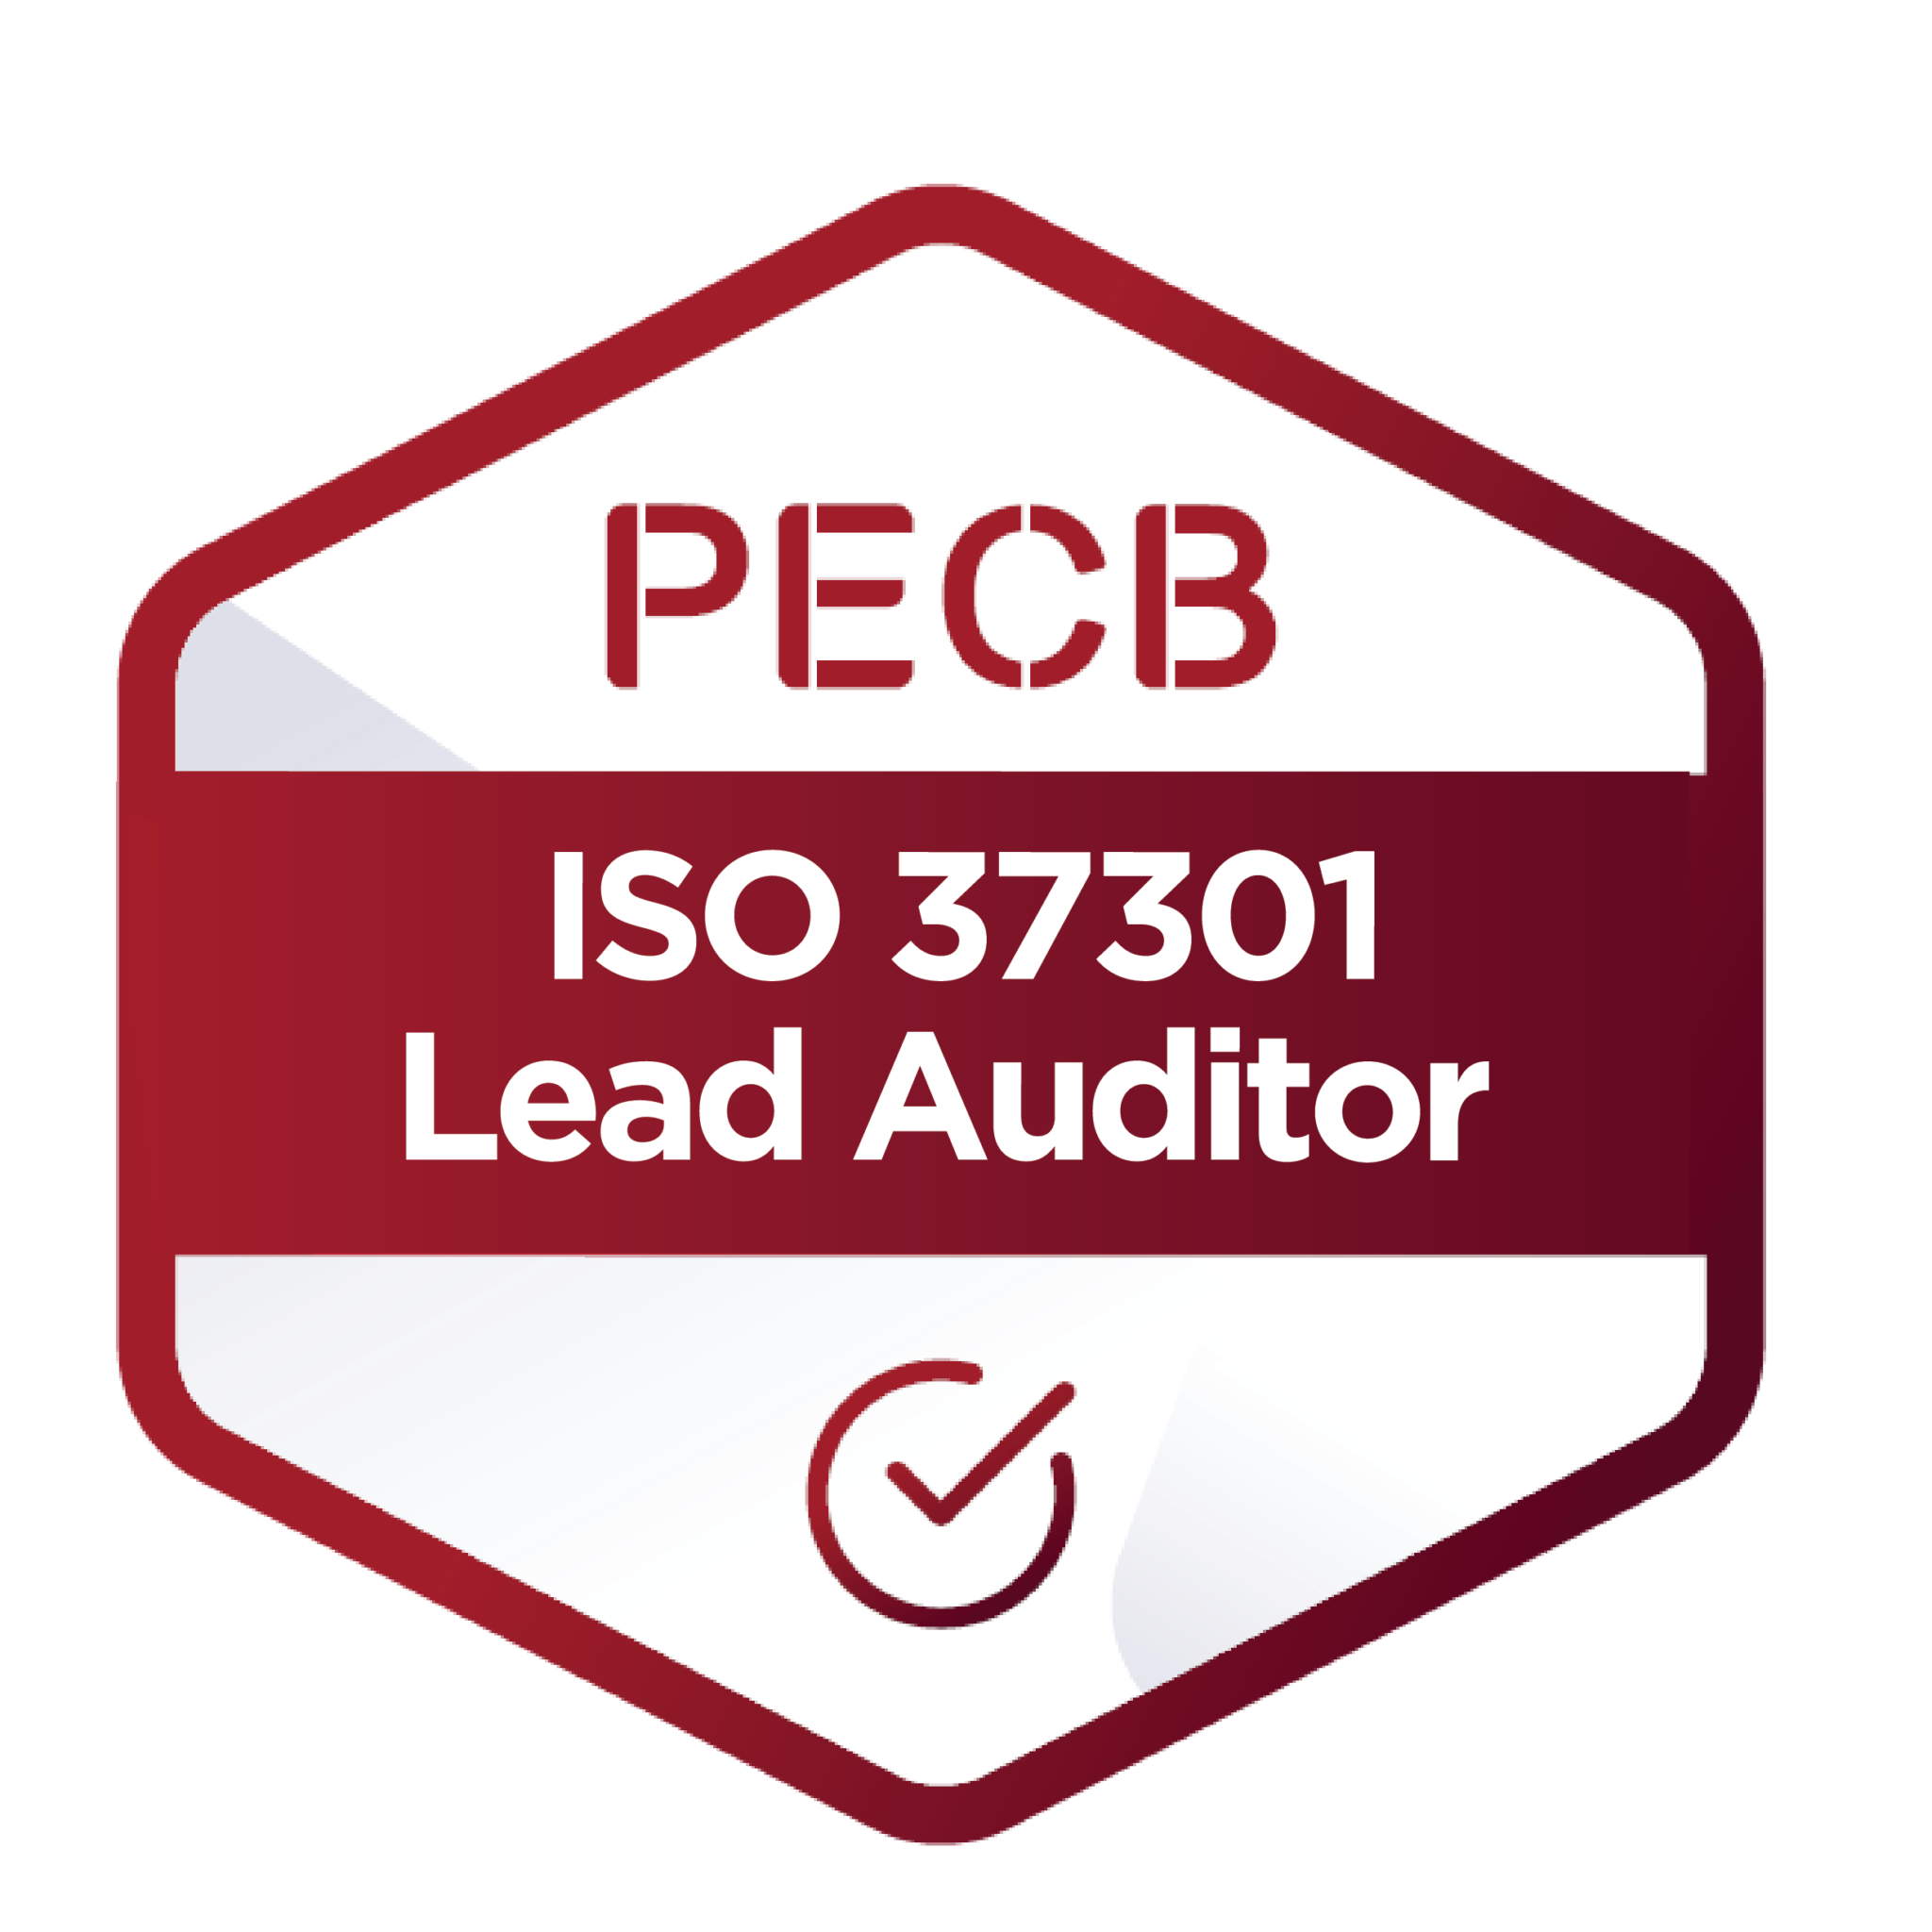 Pecb Iso 37301 Compliance Management System Crms 1904